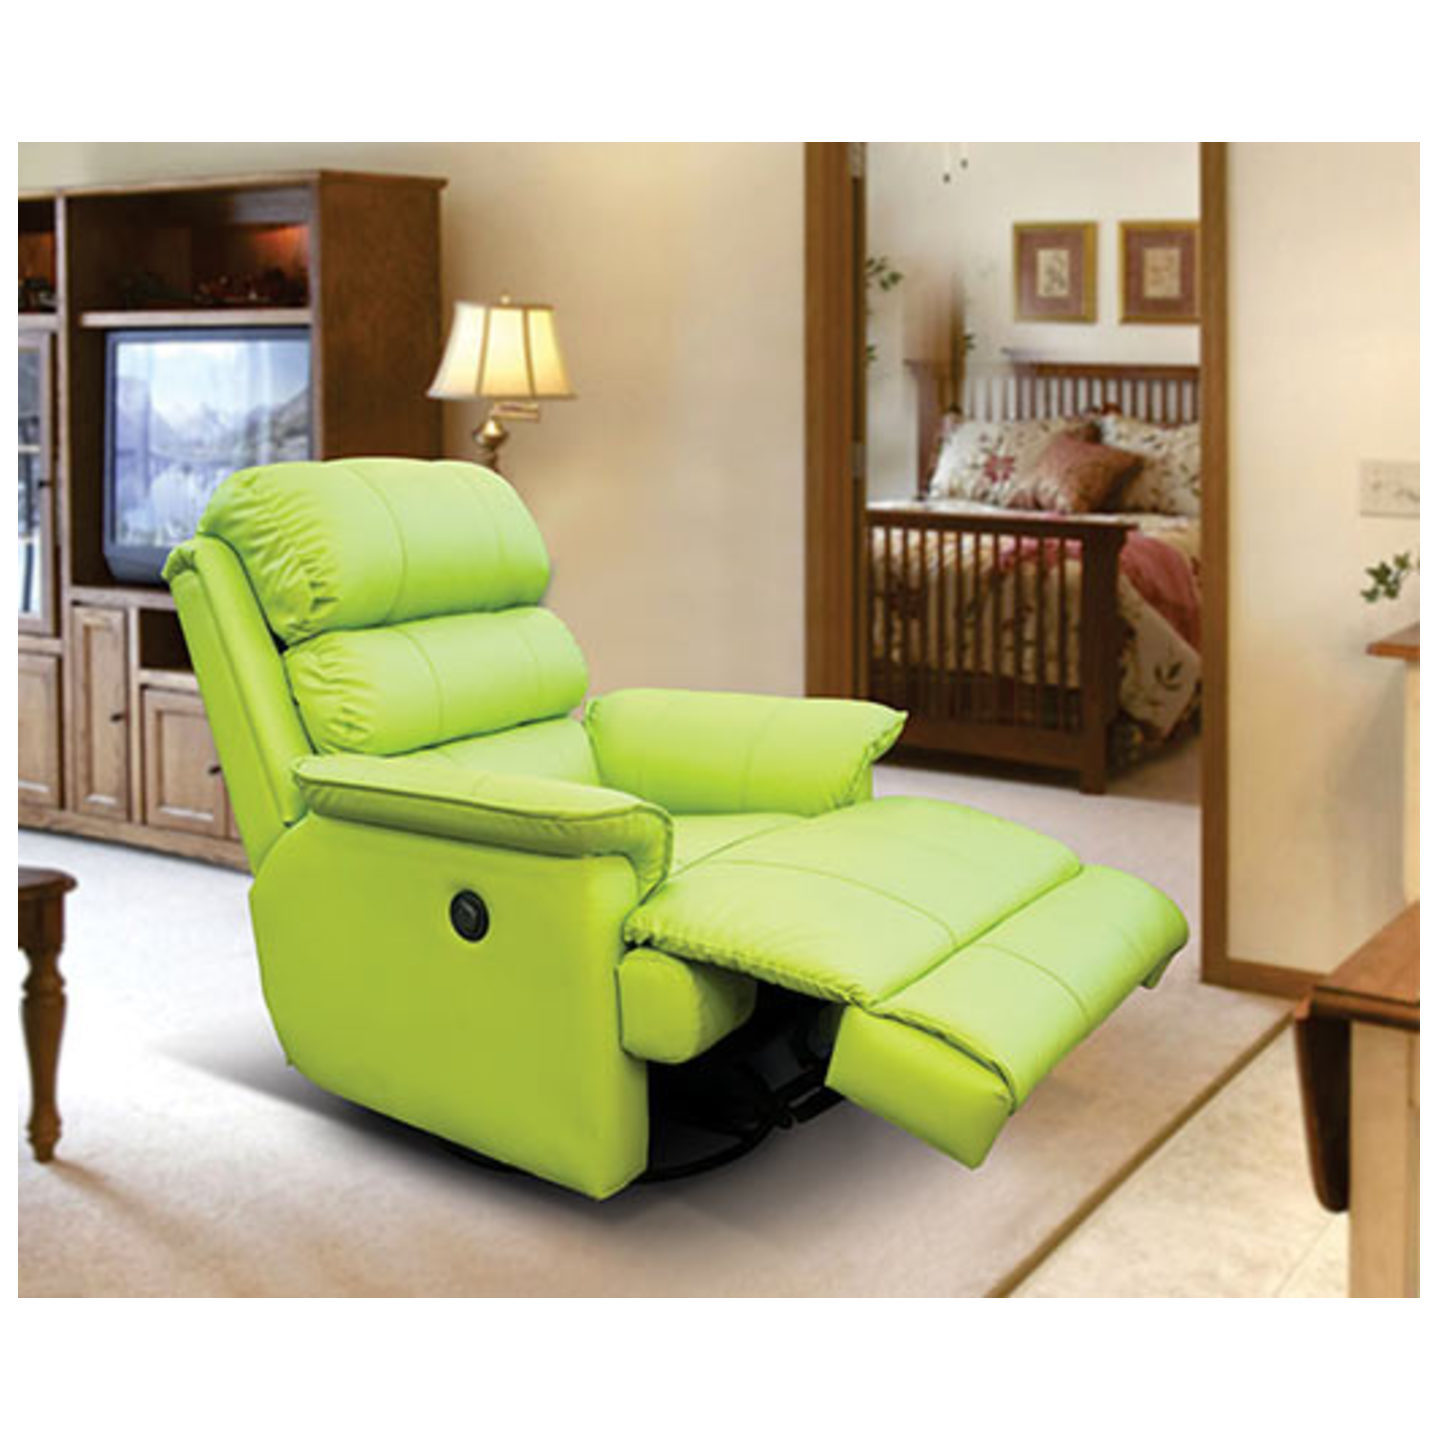 LN Recliner Chair Quies Electronic System